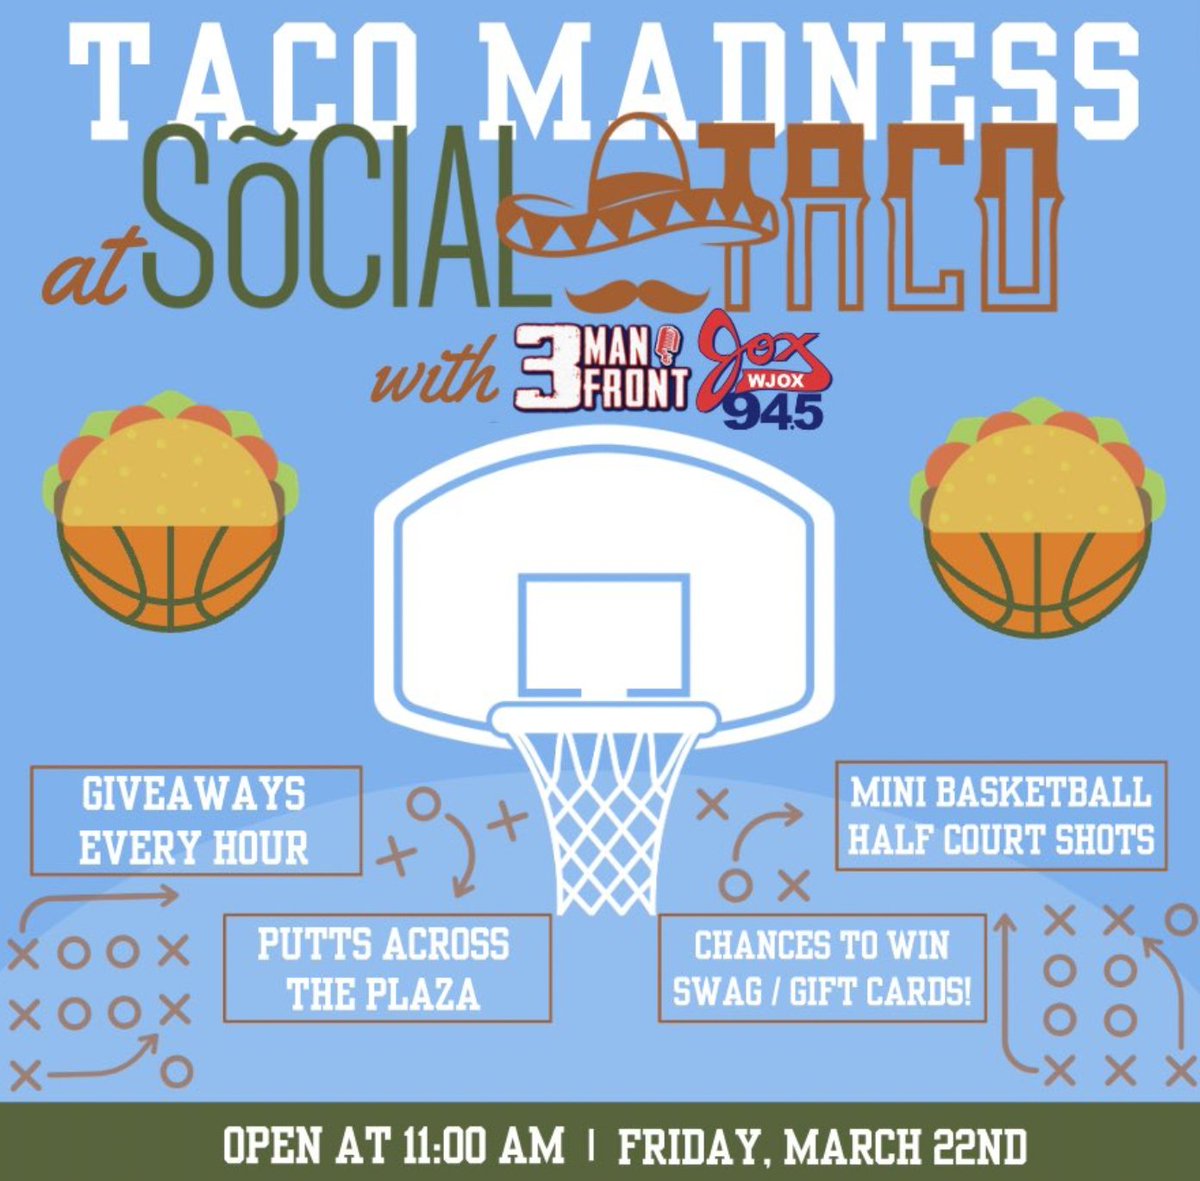 Come for lunch, stay for hoops and @3ManFront !